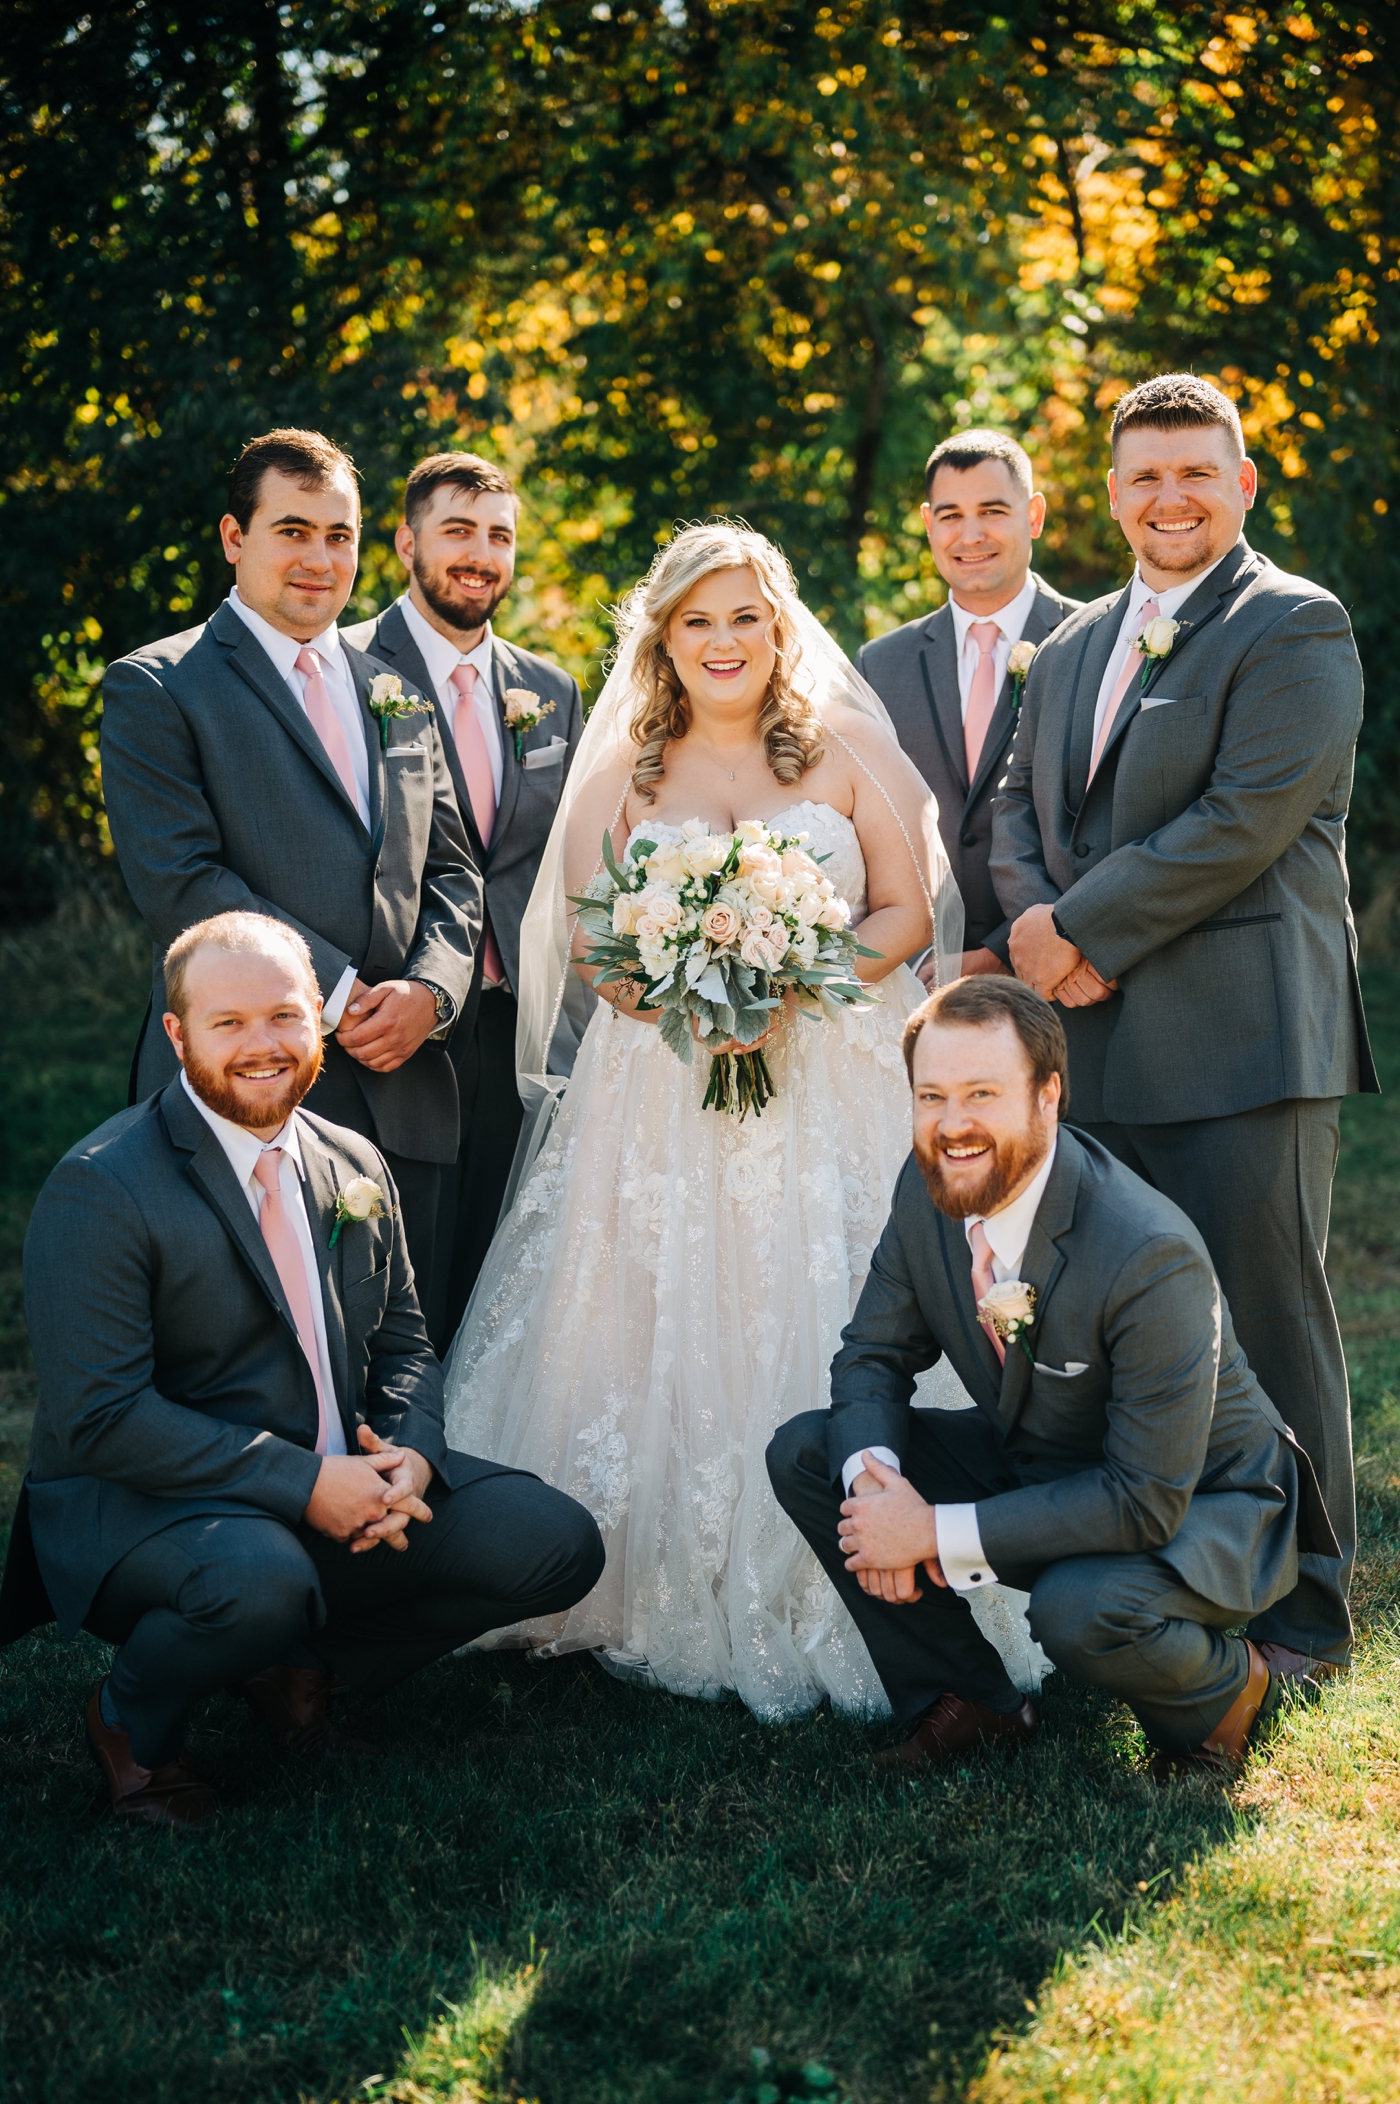 Bride with groomsmen who are wearing grey suits and blush ties